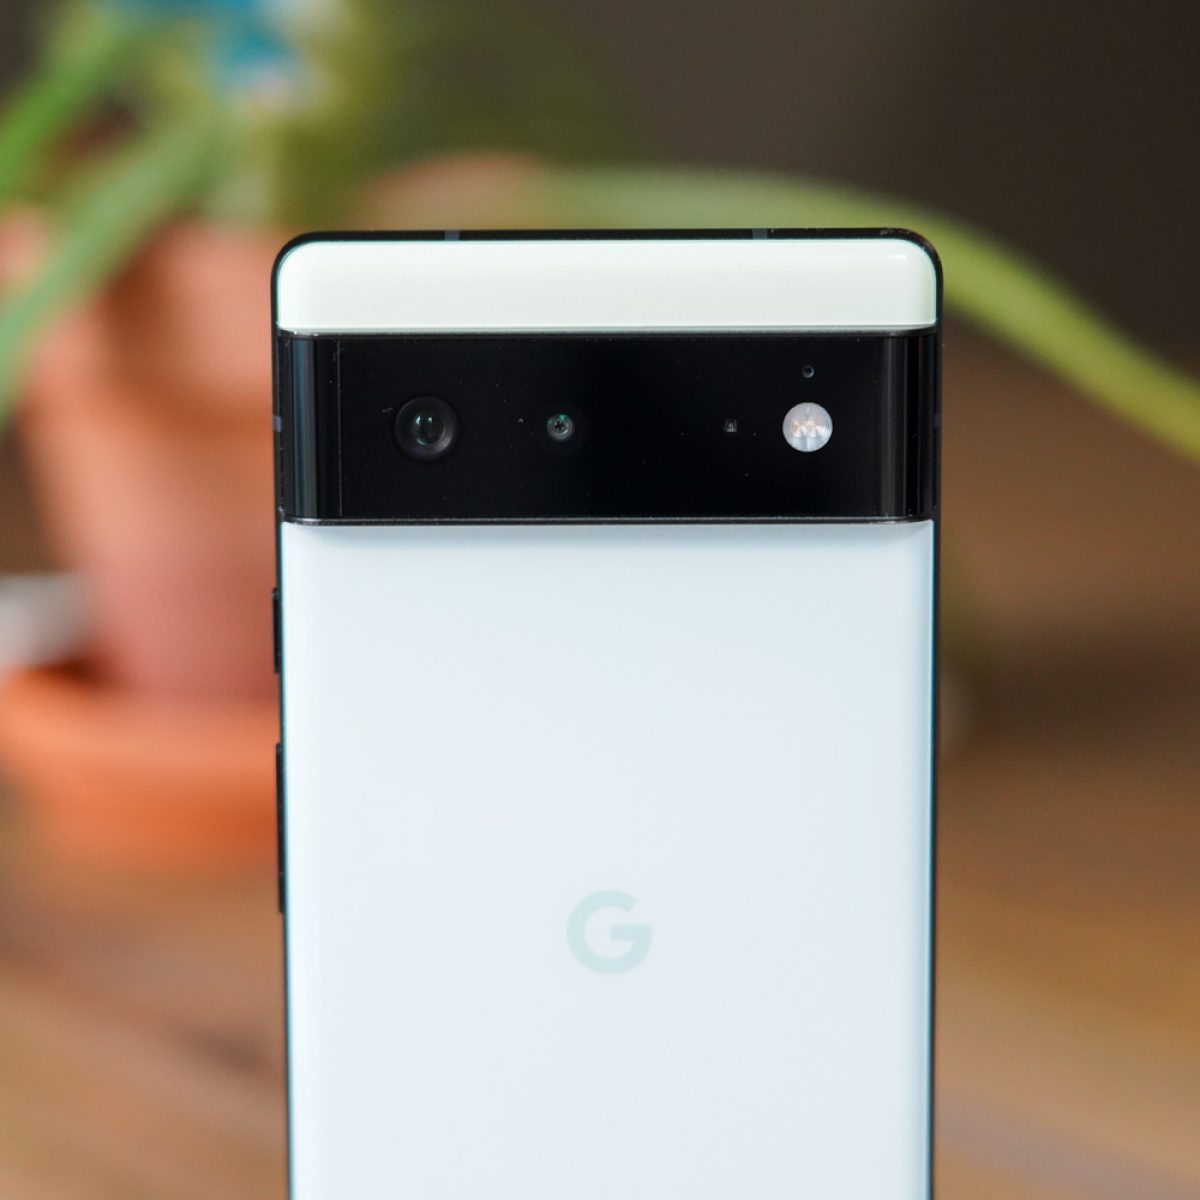 Google Pixel 6a Evidence Suggests a Mid-Range King